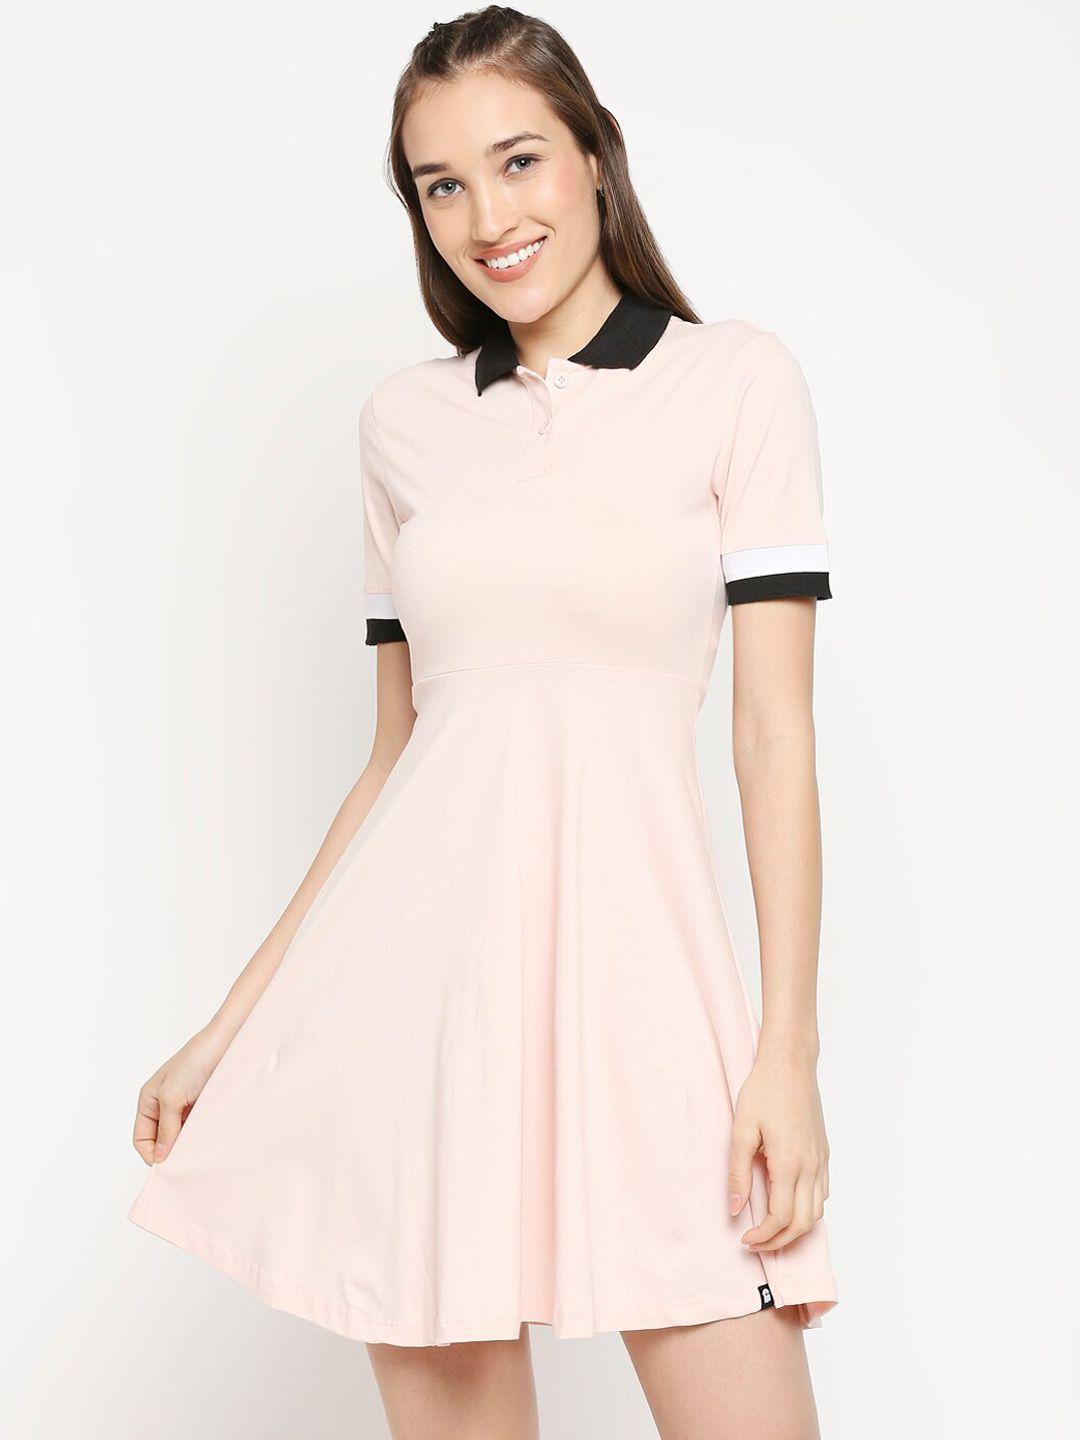 the souled store pink & black solid t-shirt dress